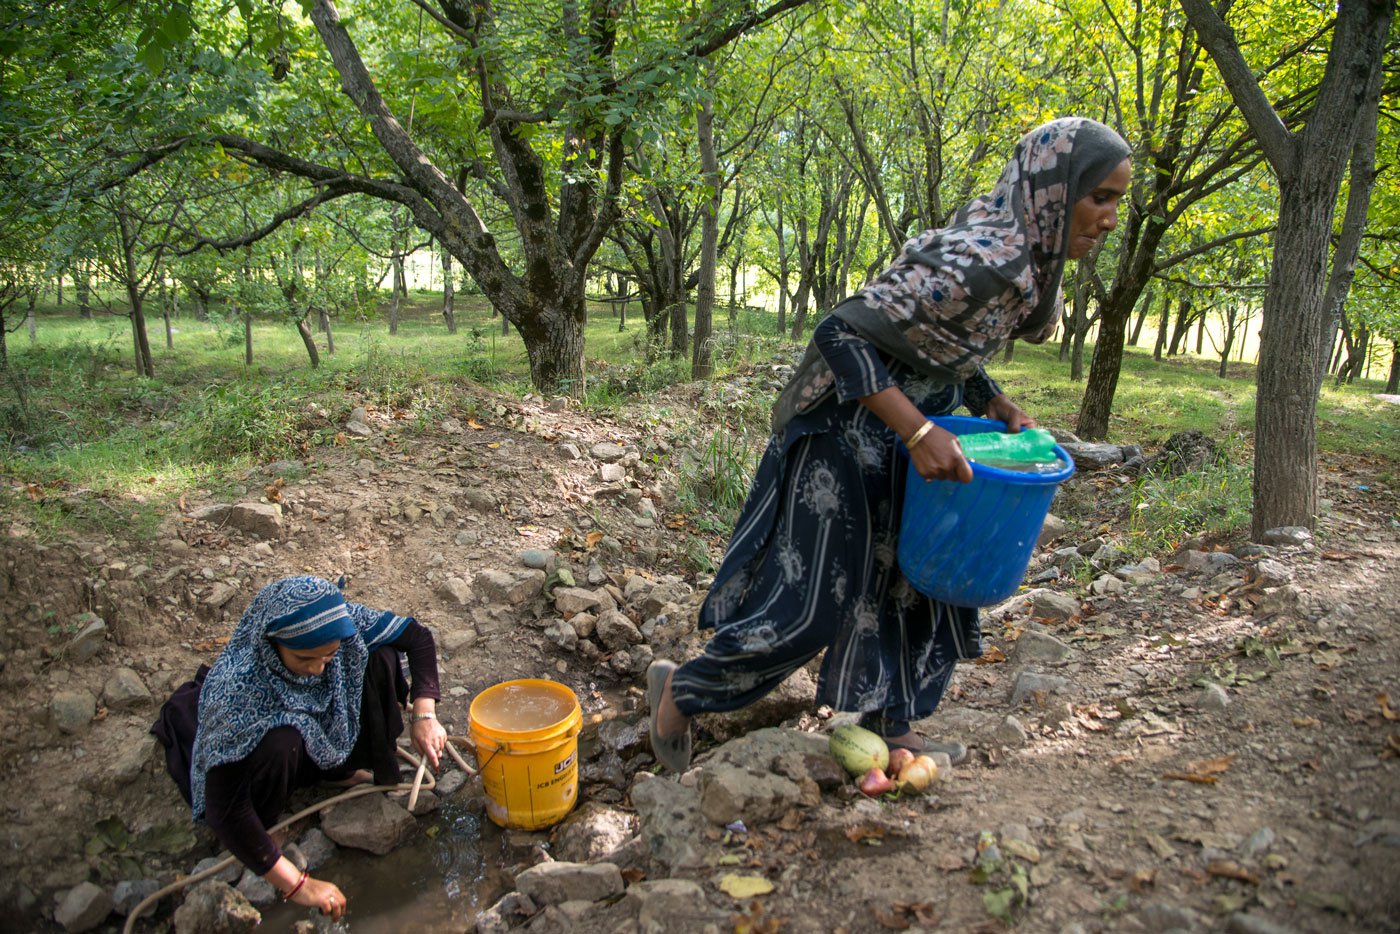 Fetching water for drinking and cooking falls on the Bakarwal women. They must make several trips a day up steep climbs